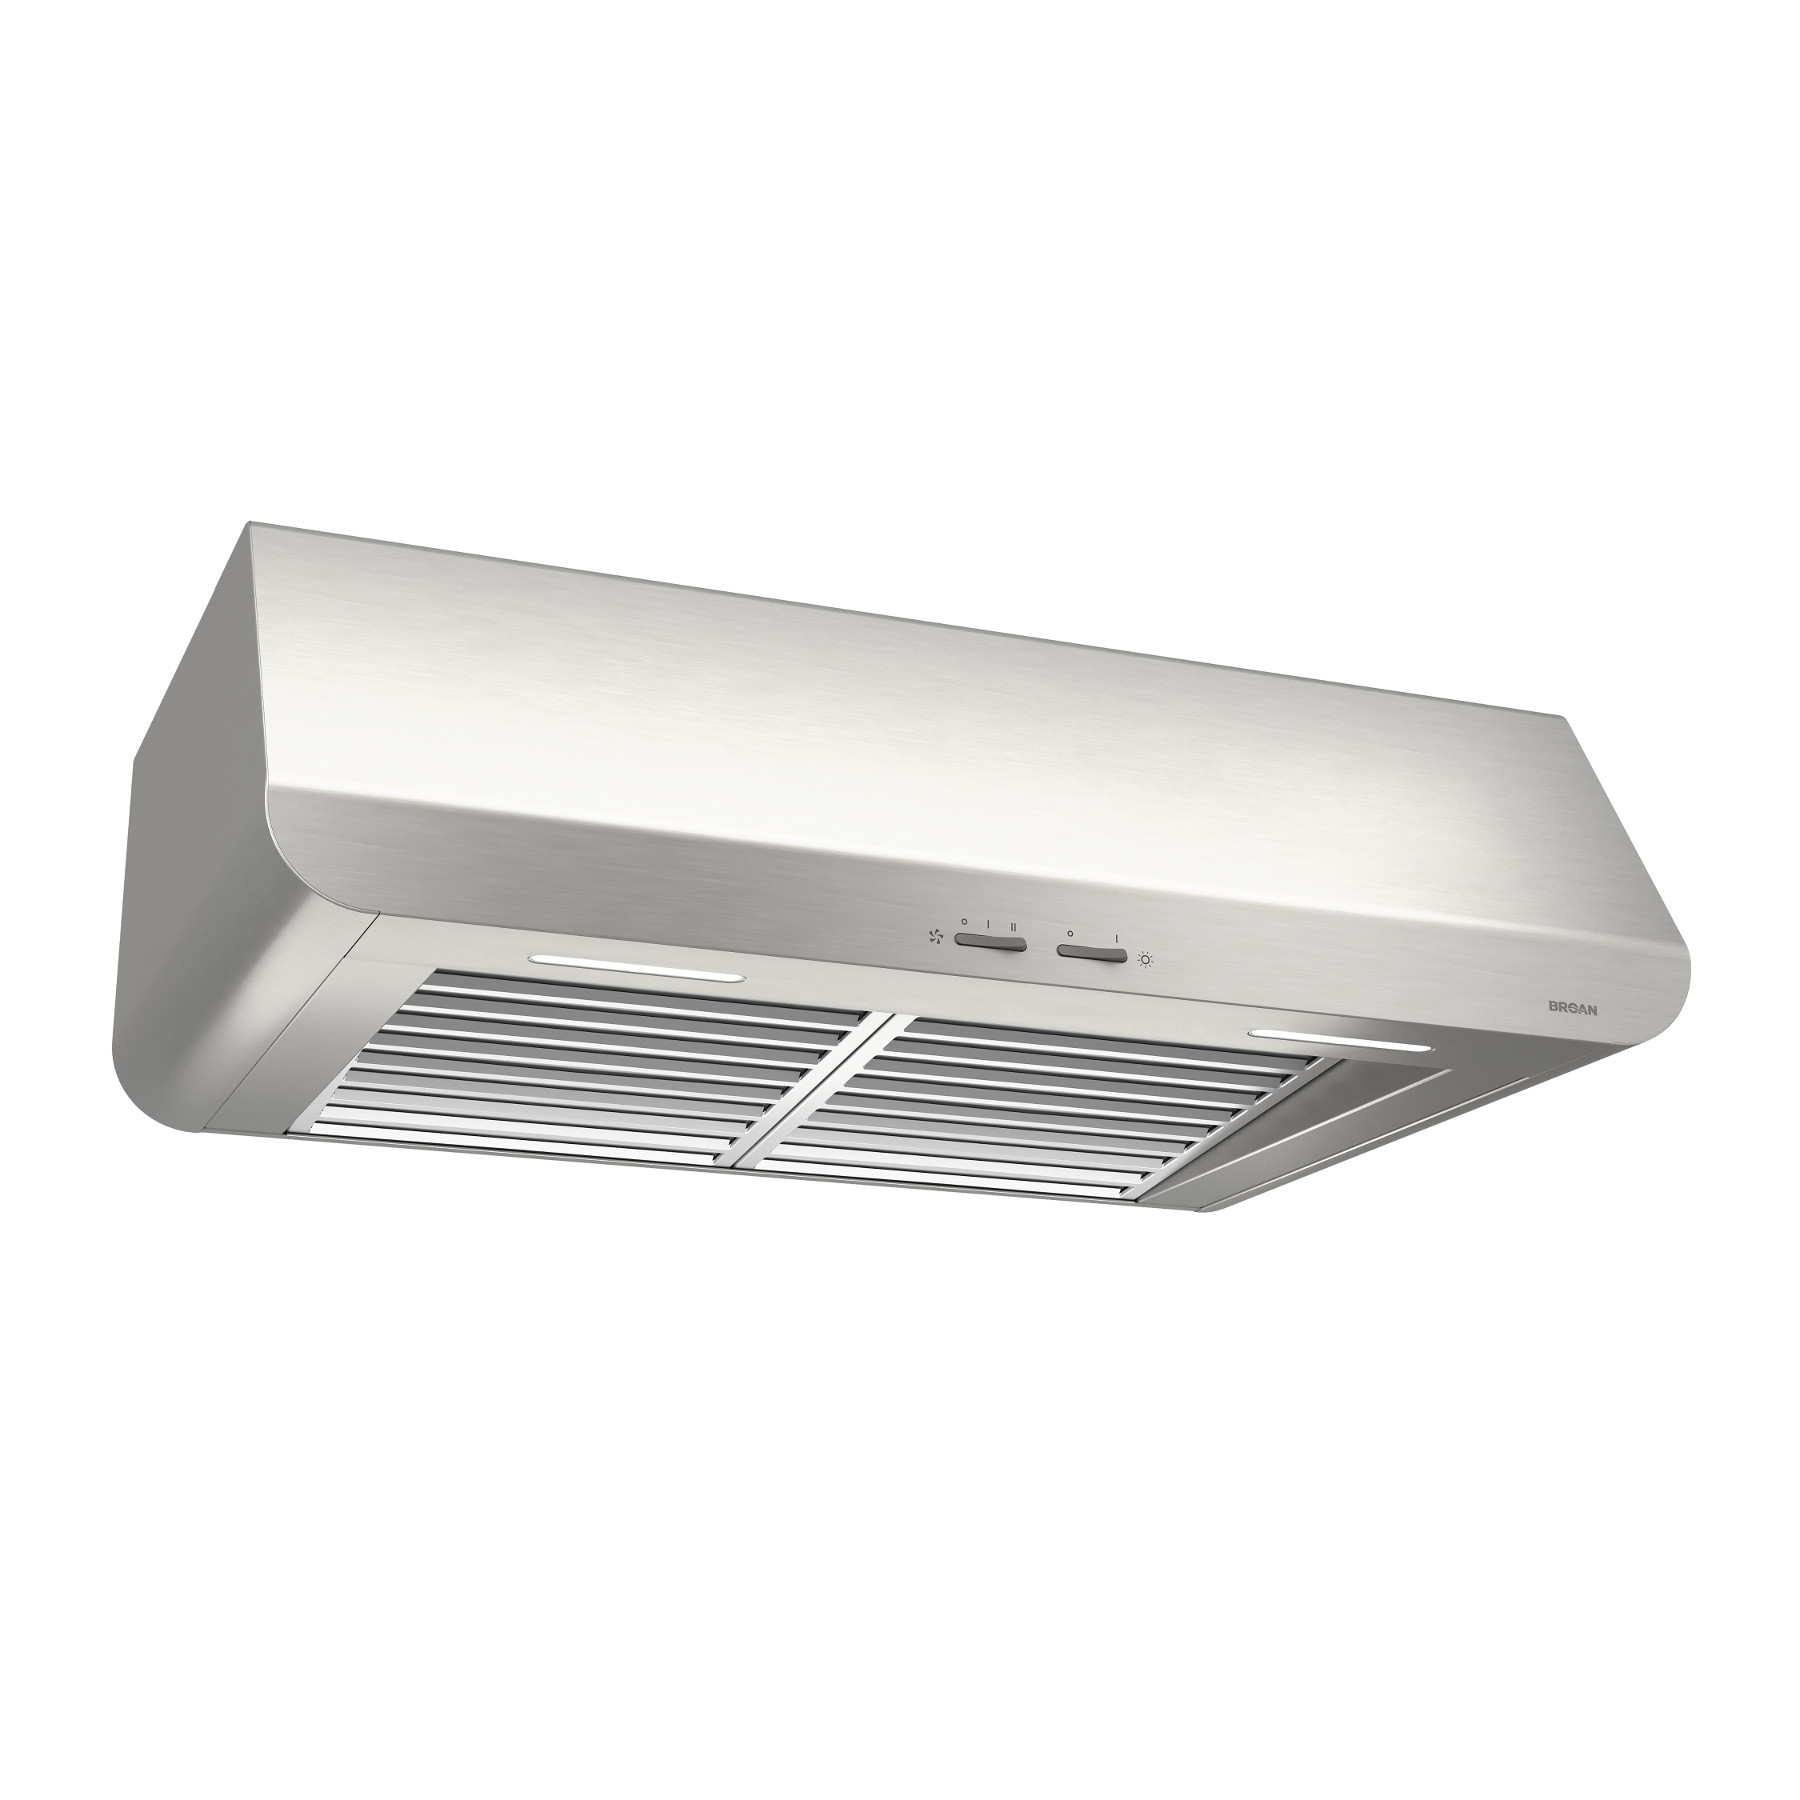 **DISCONTINUED** Broan® Spire 30-Inch Convertible Under-Cabinet Range Hood, 450 Max Blower CFM, Stainless Steel